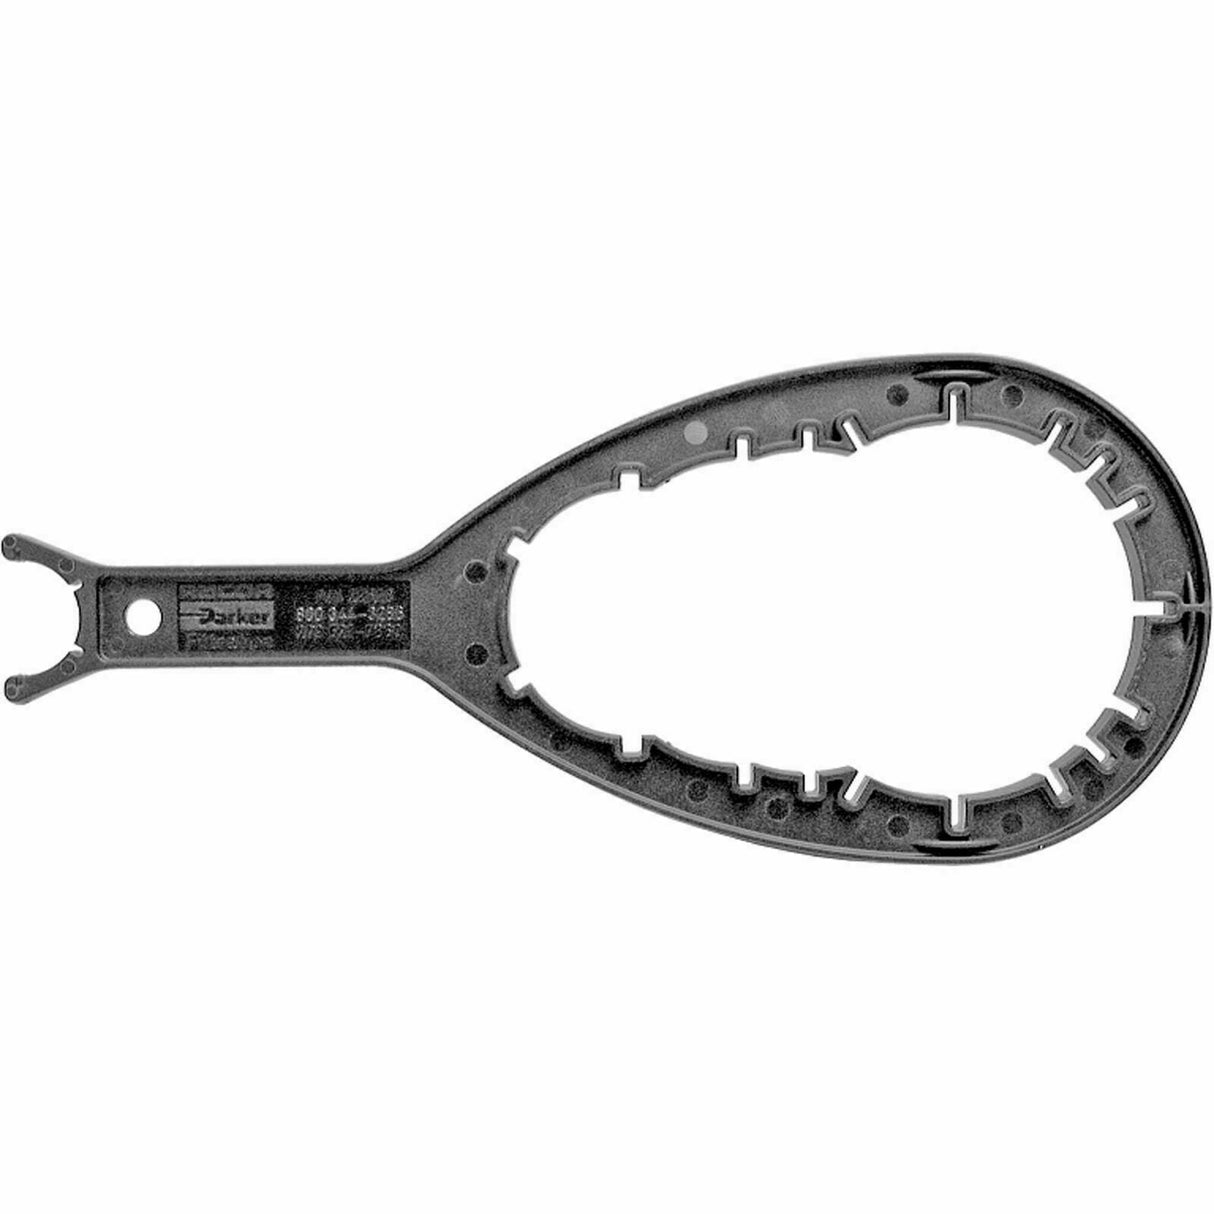 Racor RK 22628 Fuel Filter Bowl Wrench